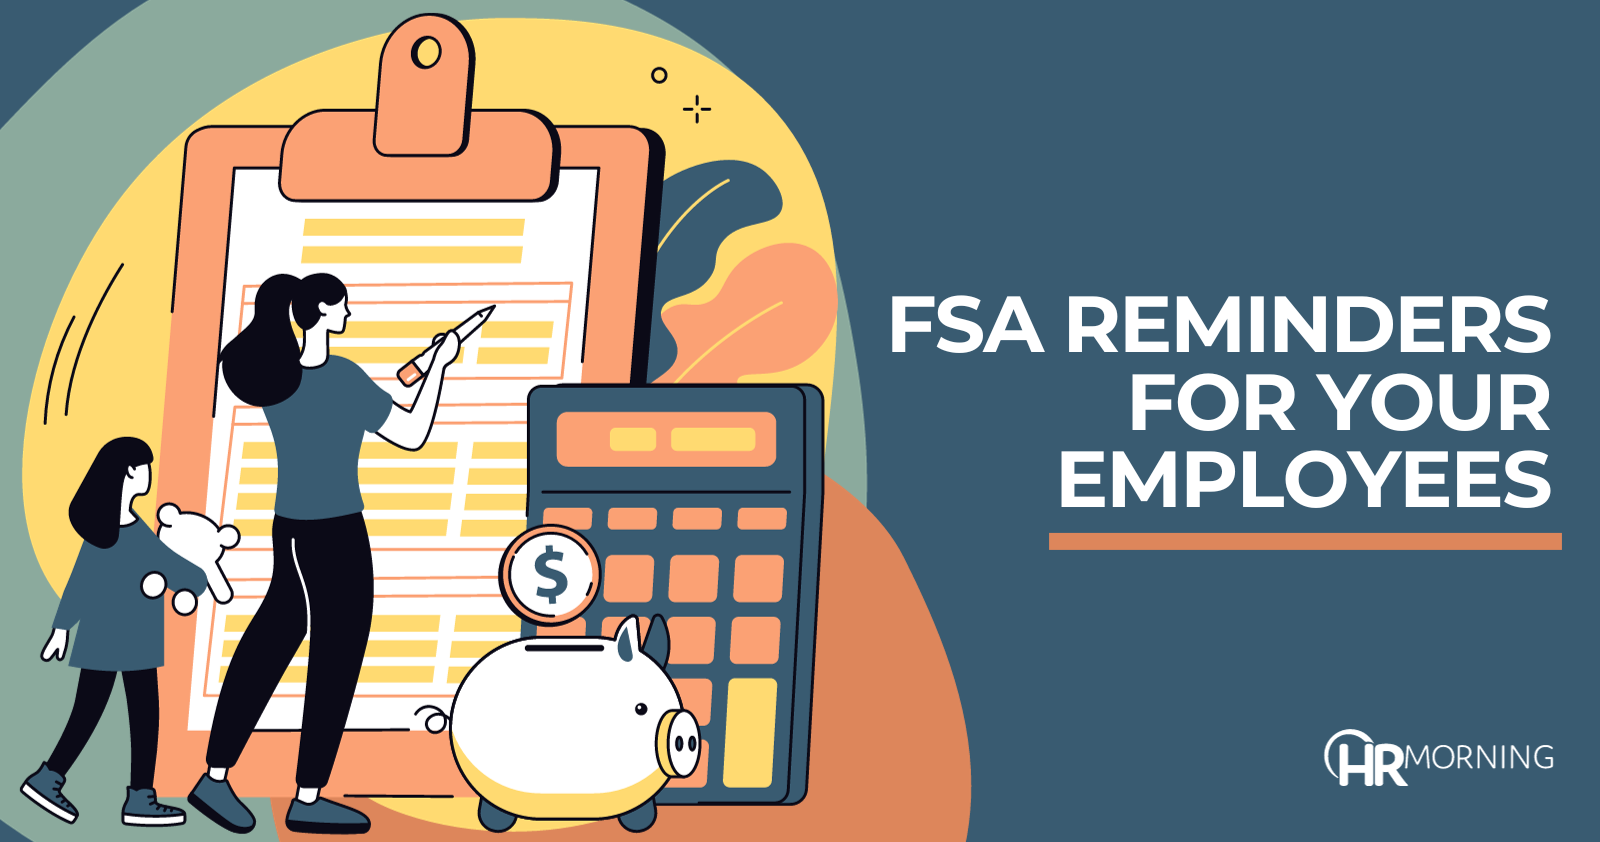 FSA reminders for your employees